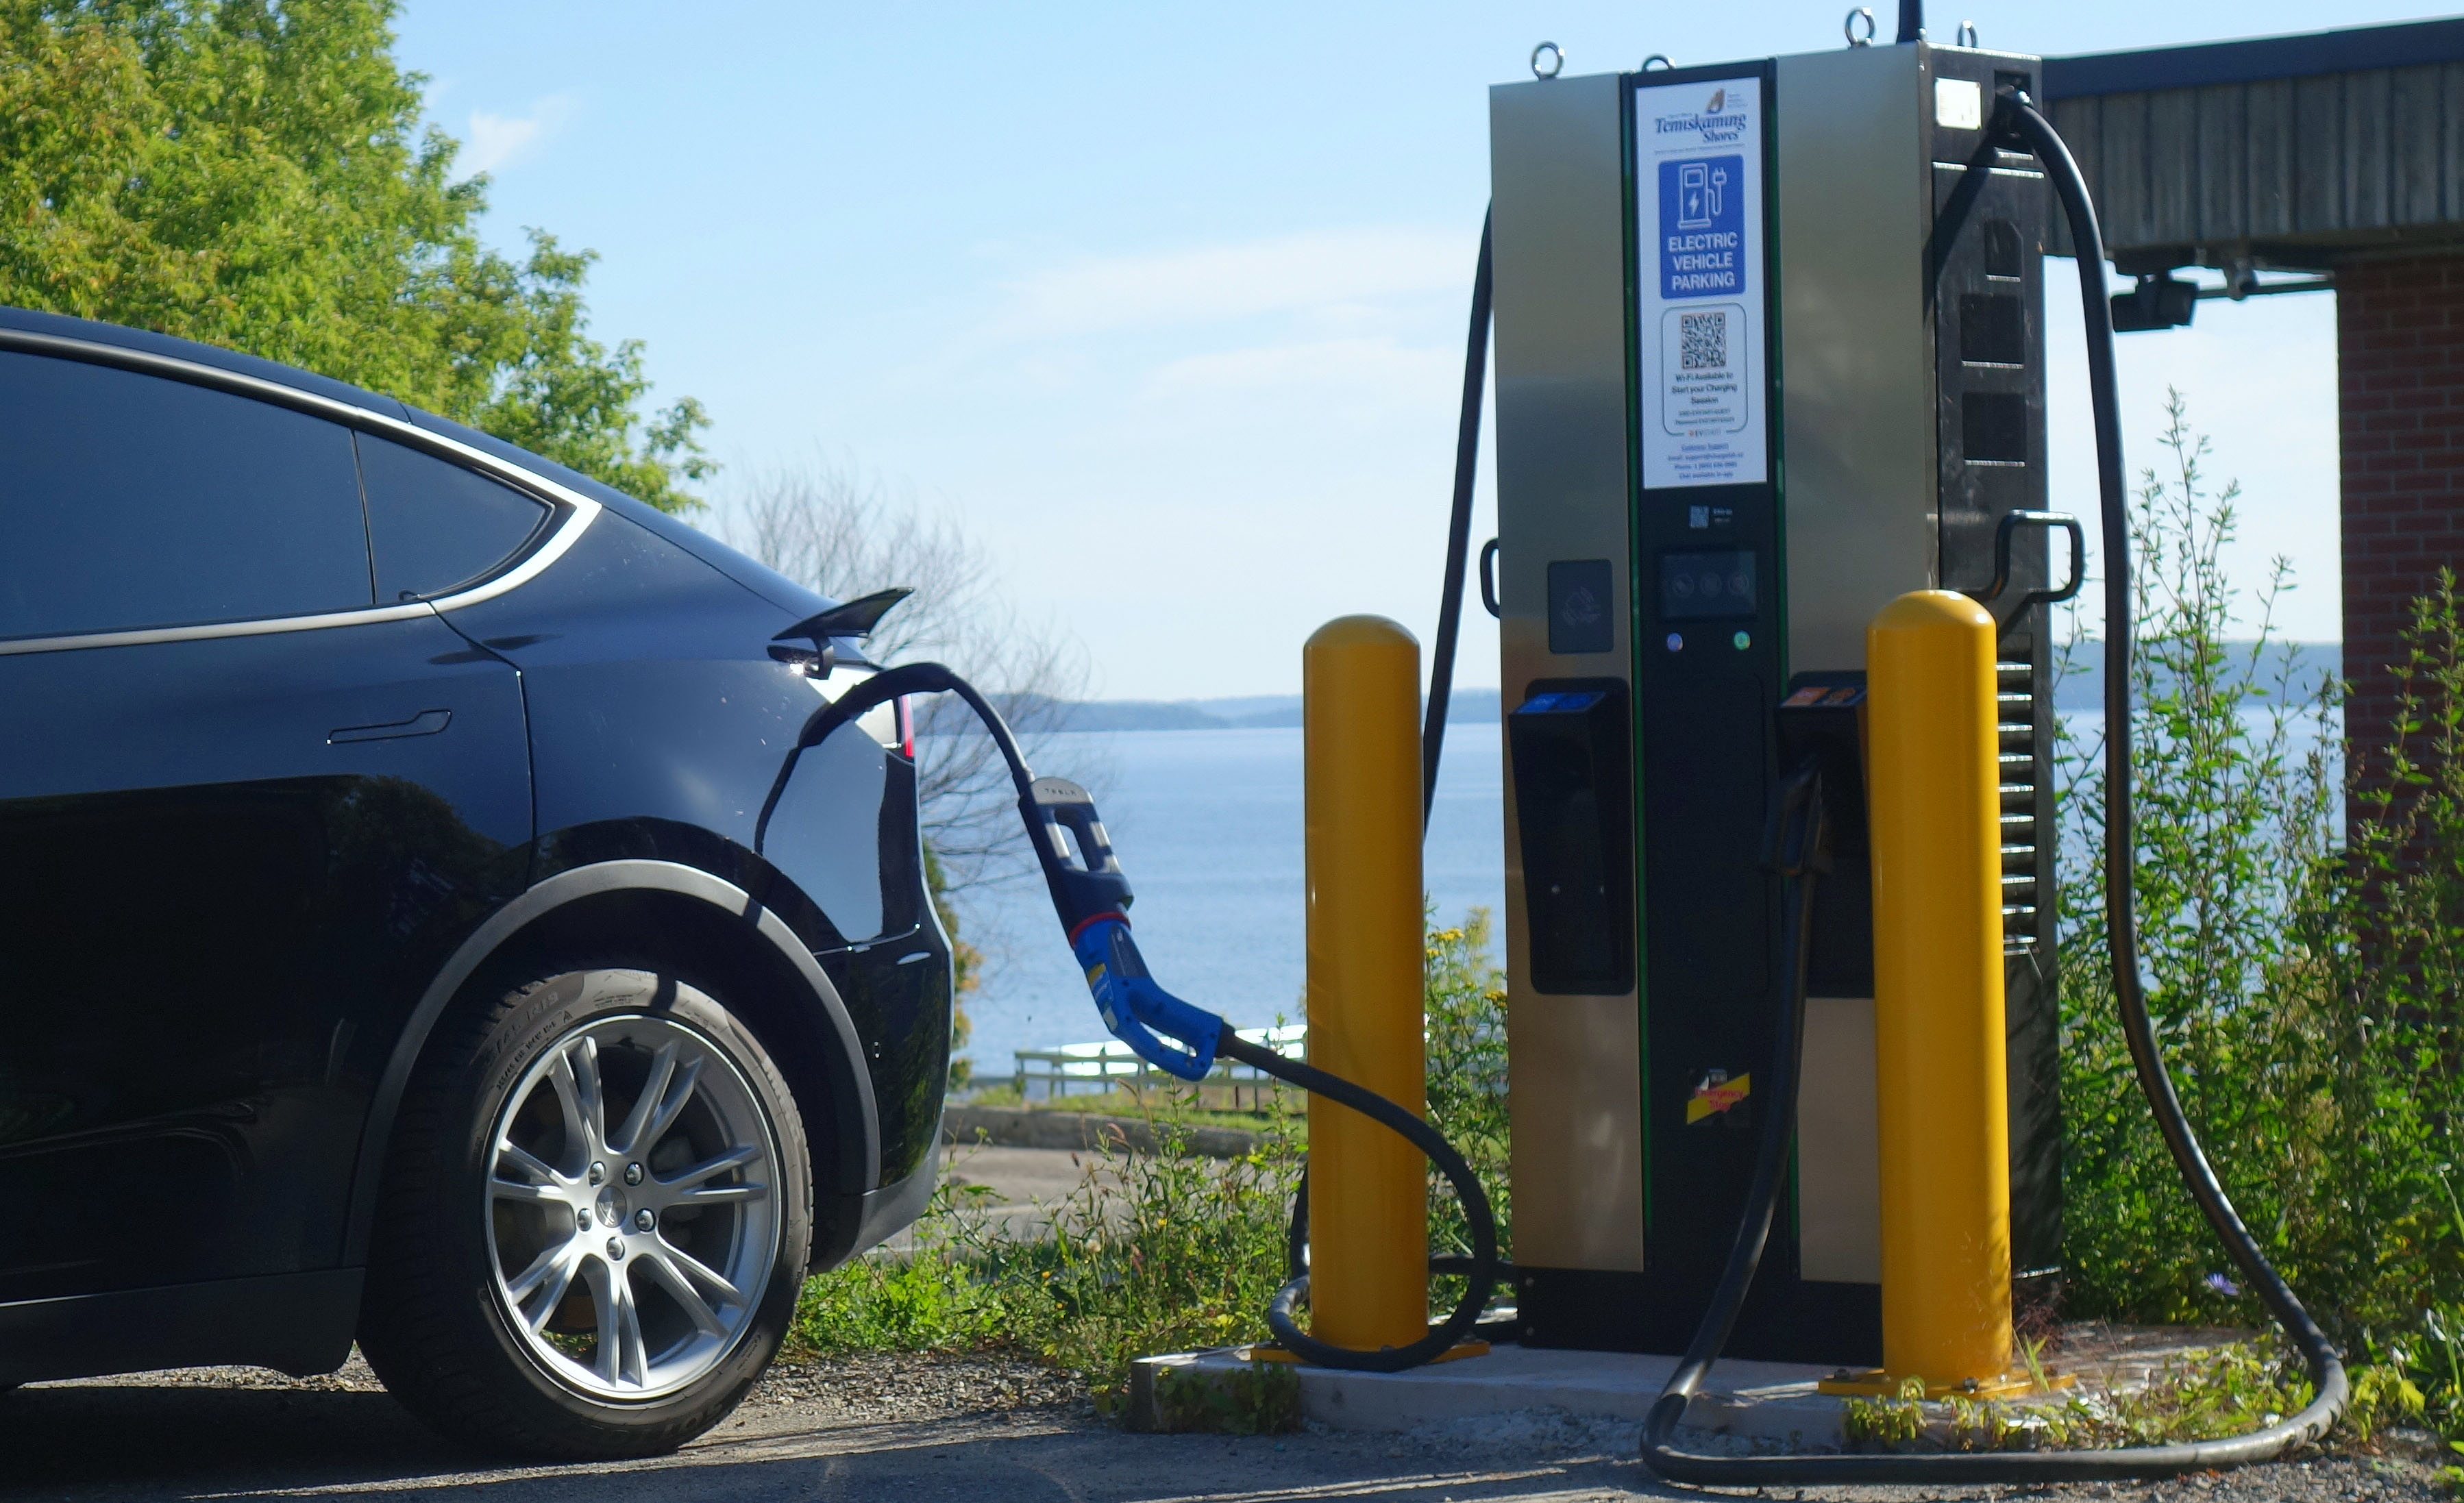 Electric vehicle charging at the Haileybury beach EVStart Charging Station in Temiskaming Shores, Ontario, with Lake Timiskaming in the background on a summer day.